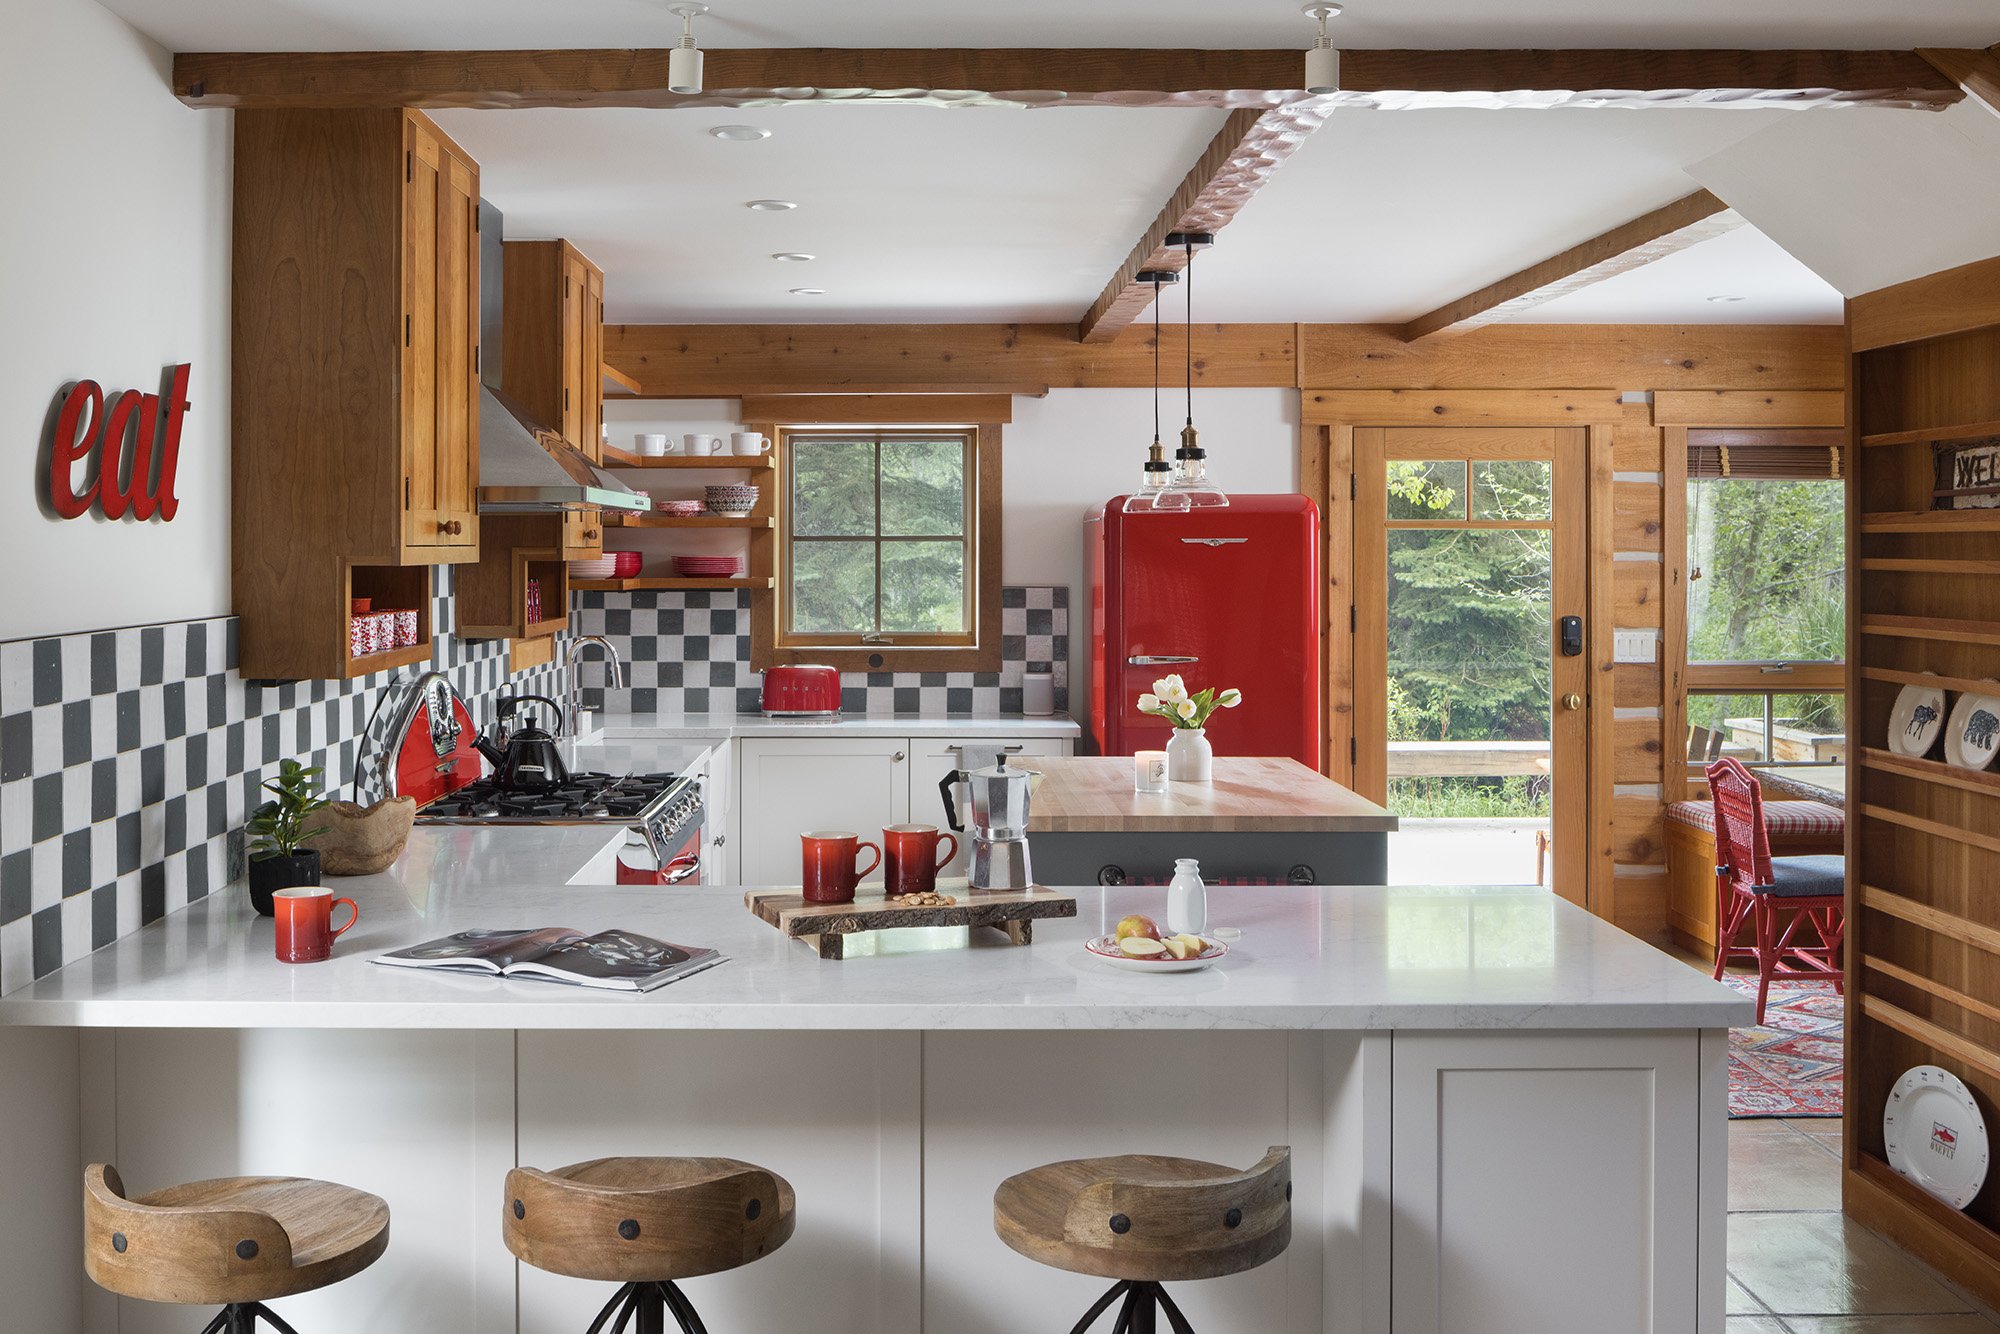 Red and white checkered kitchen in a cabin